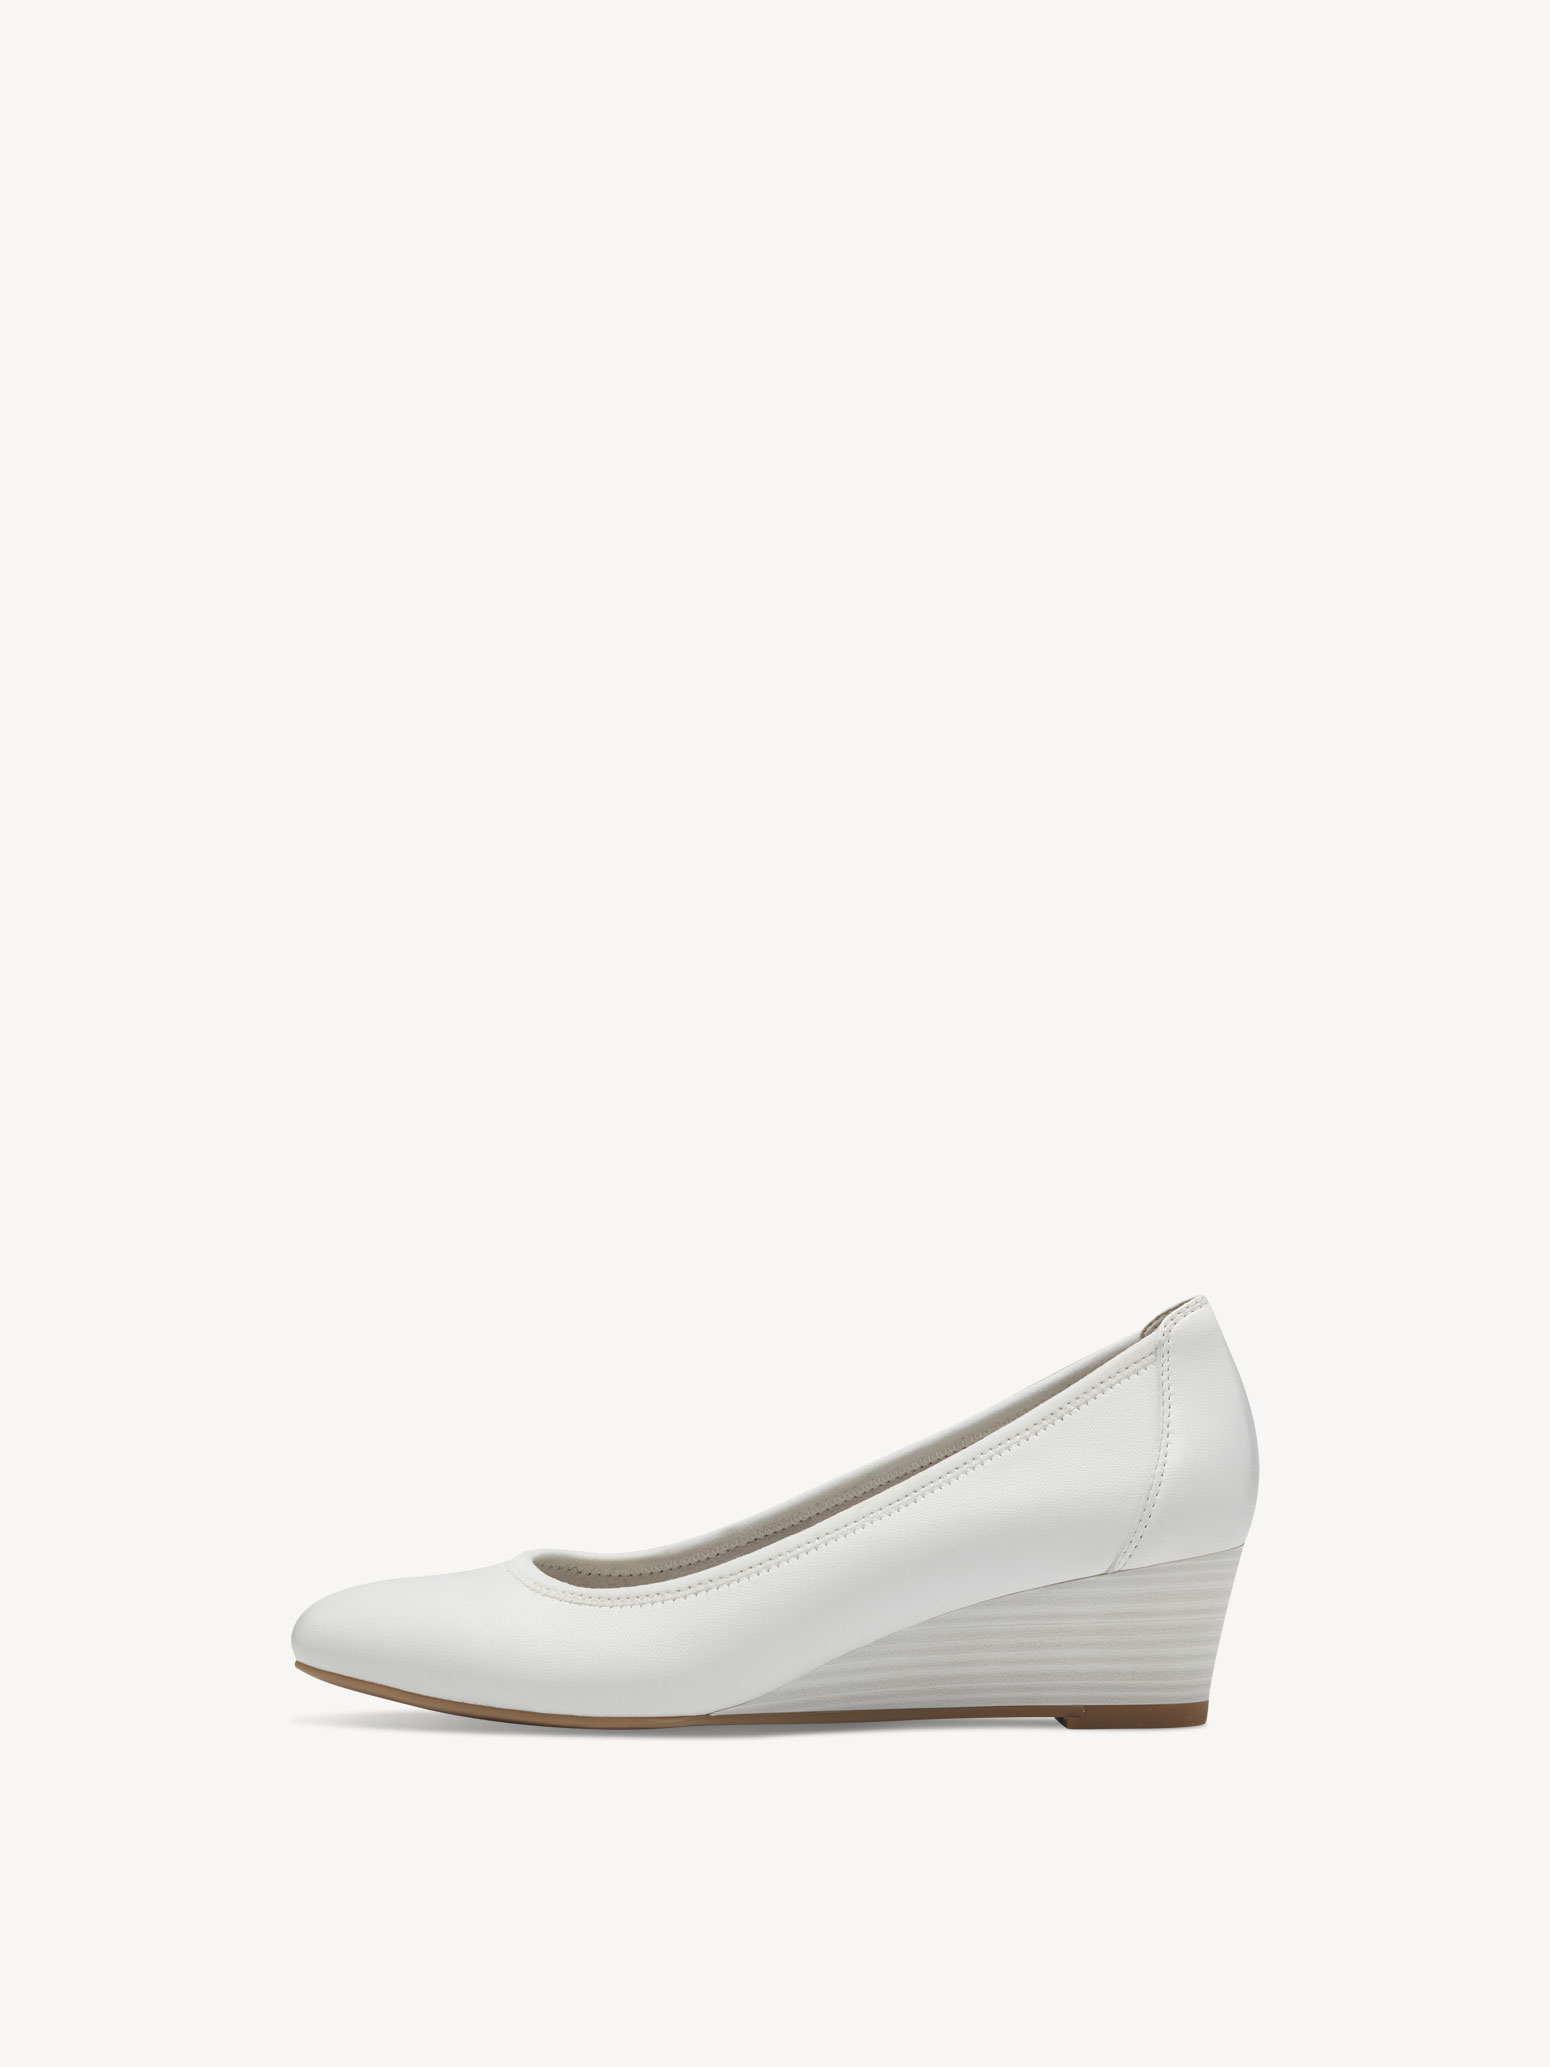 Leather Wedge pumps - white